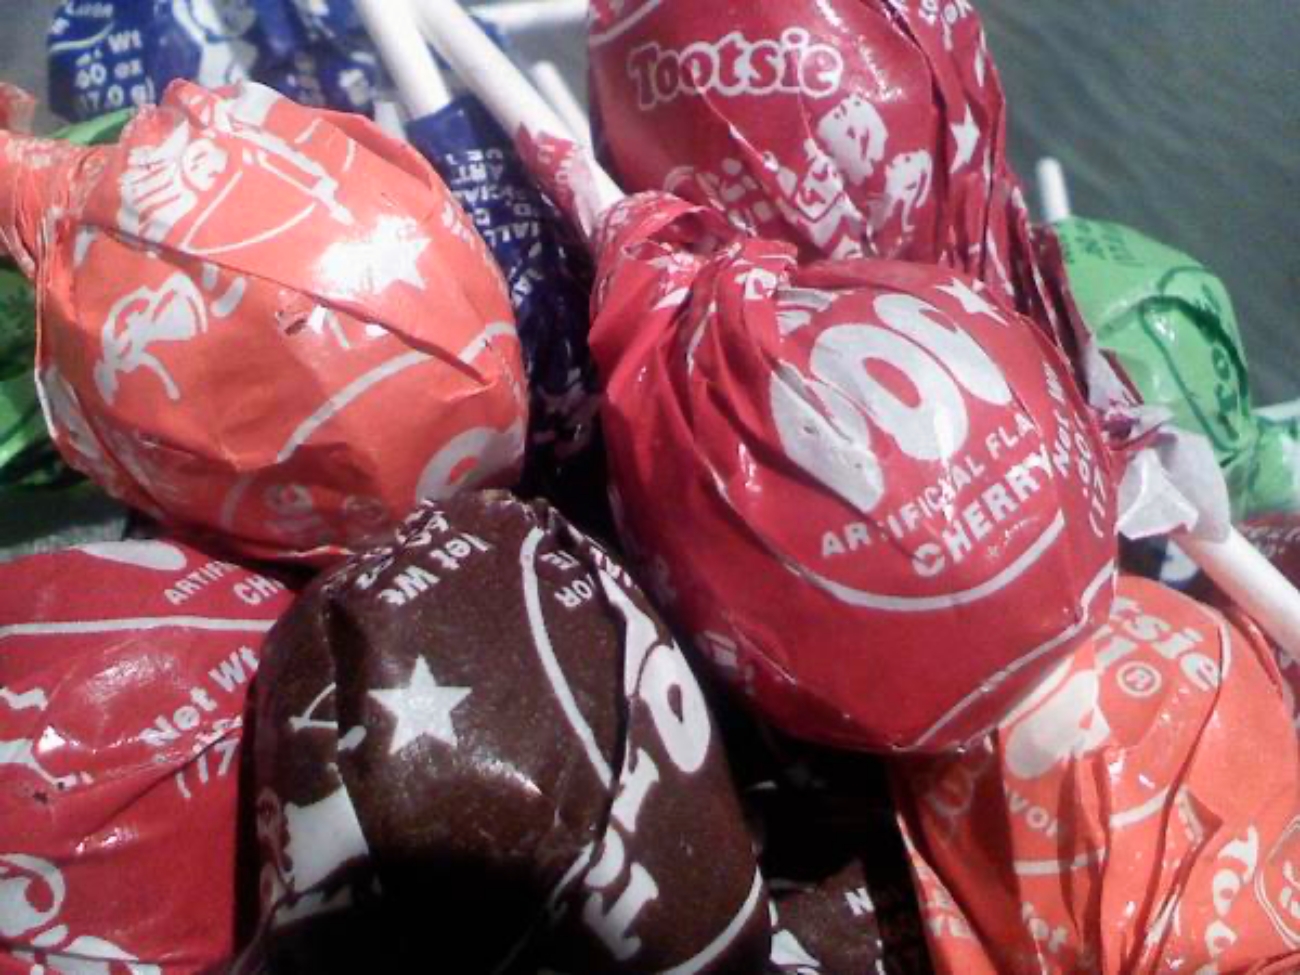 Tootsie Pops with stars on wrappers